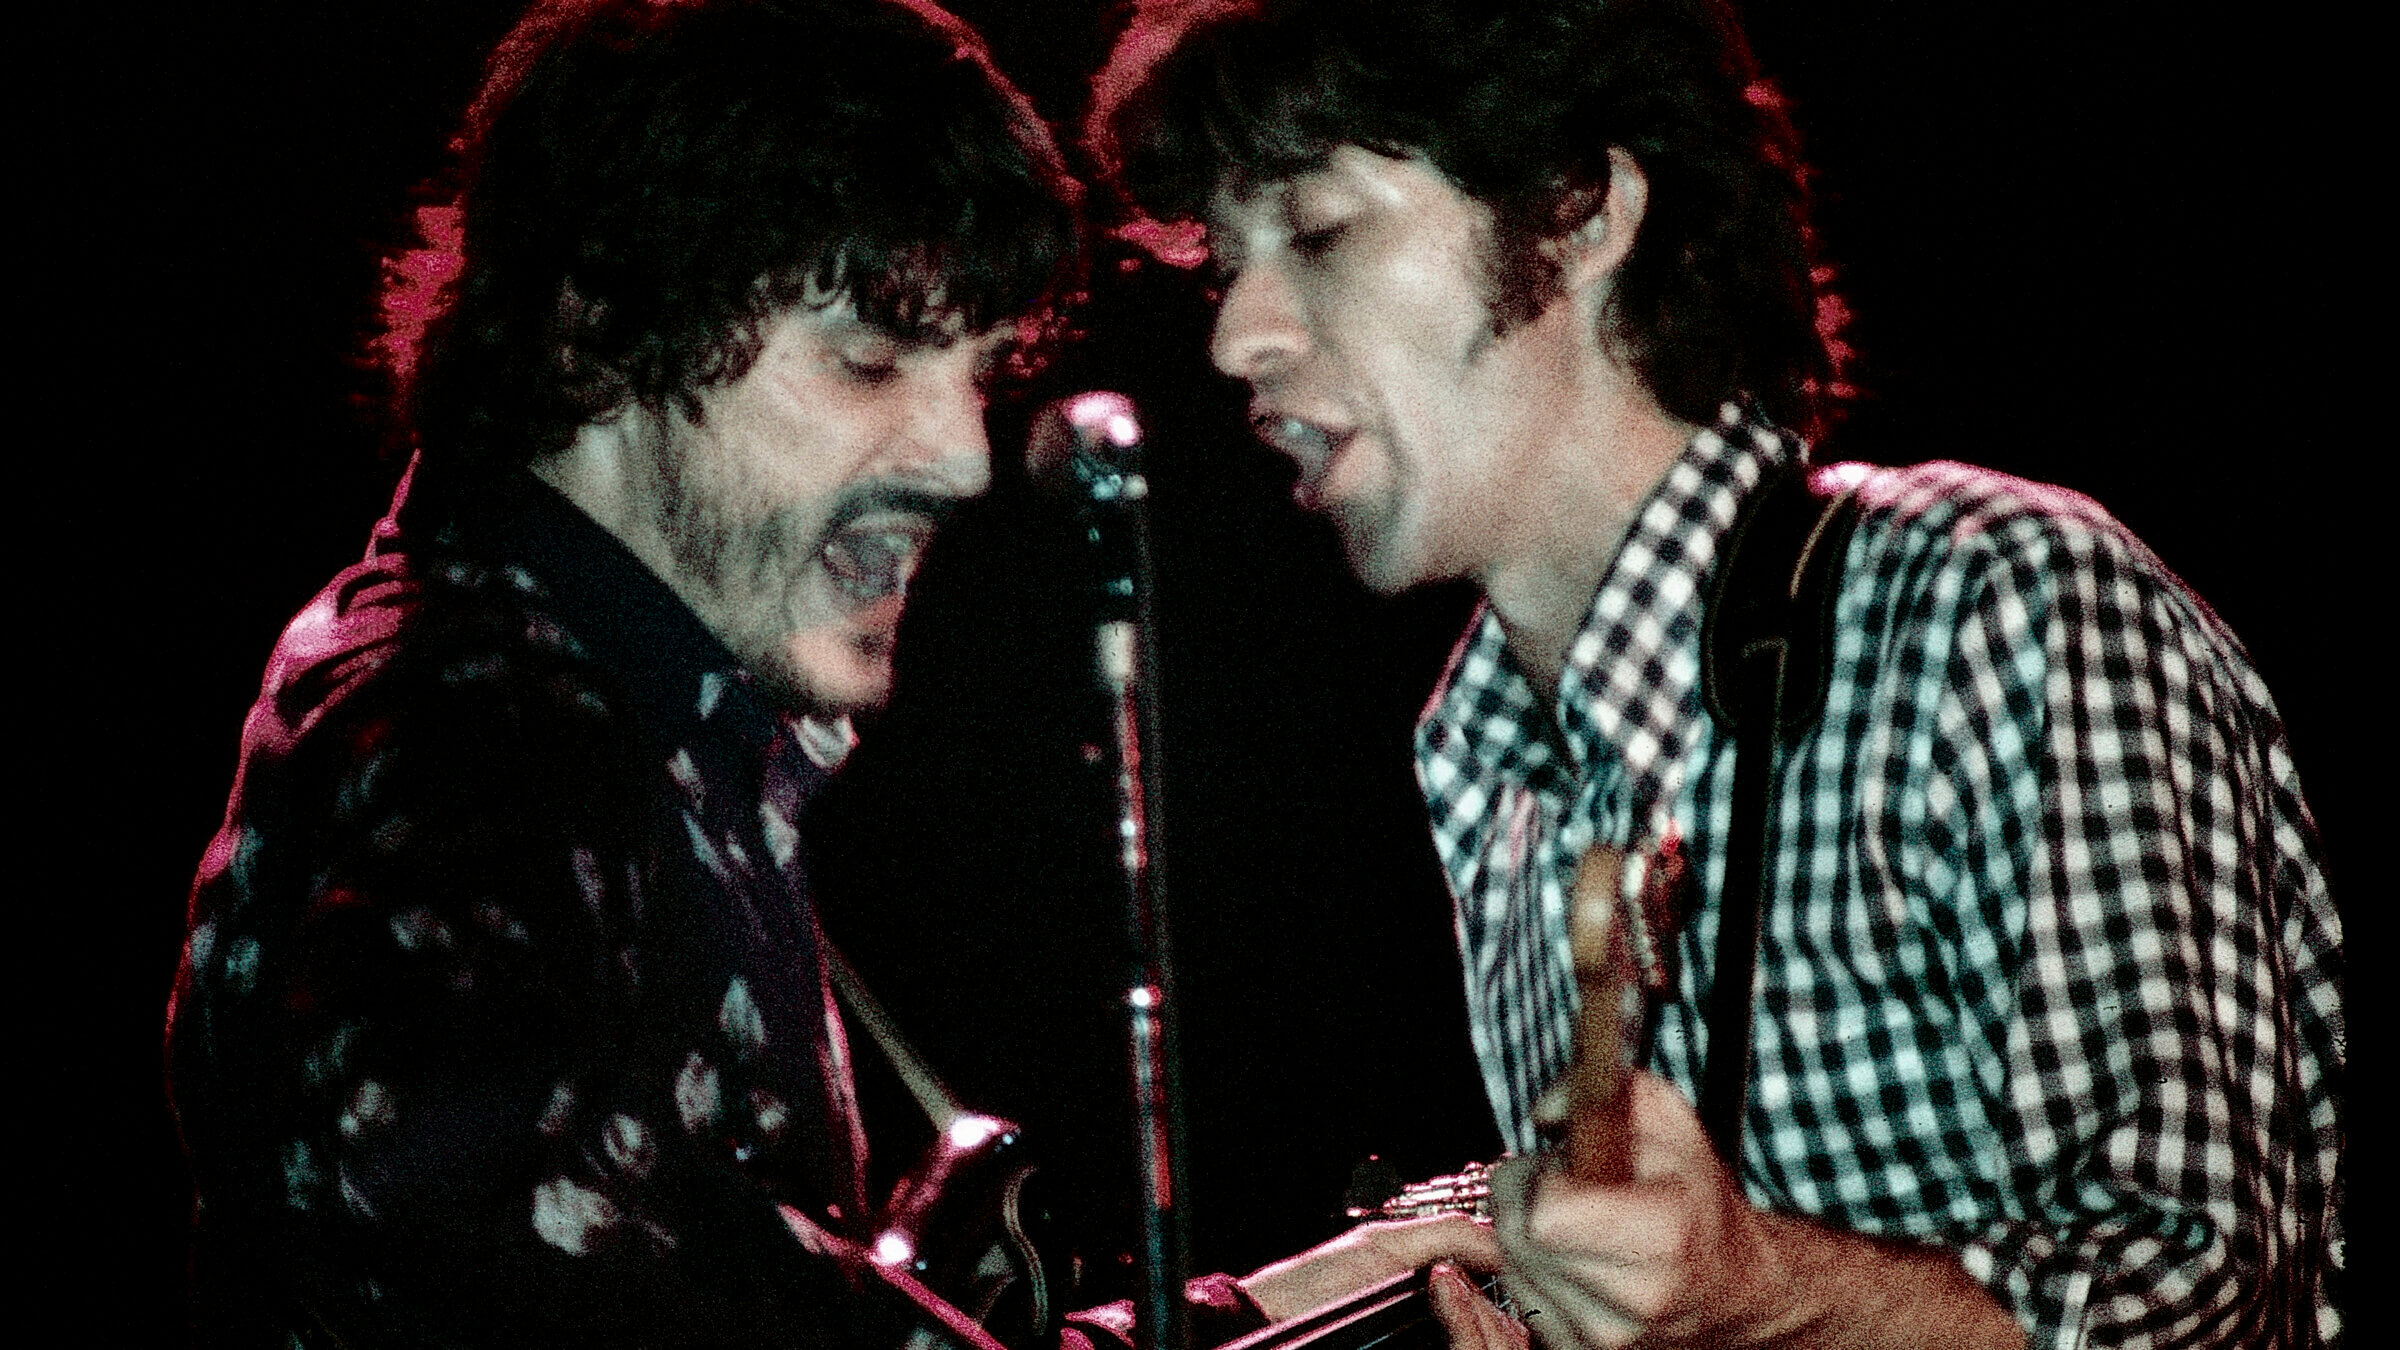 Rick Danko and Robbie Robertson perform together as part of The Band in 1974.